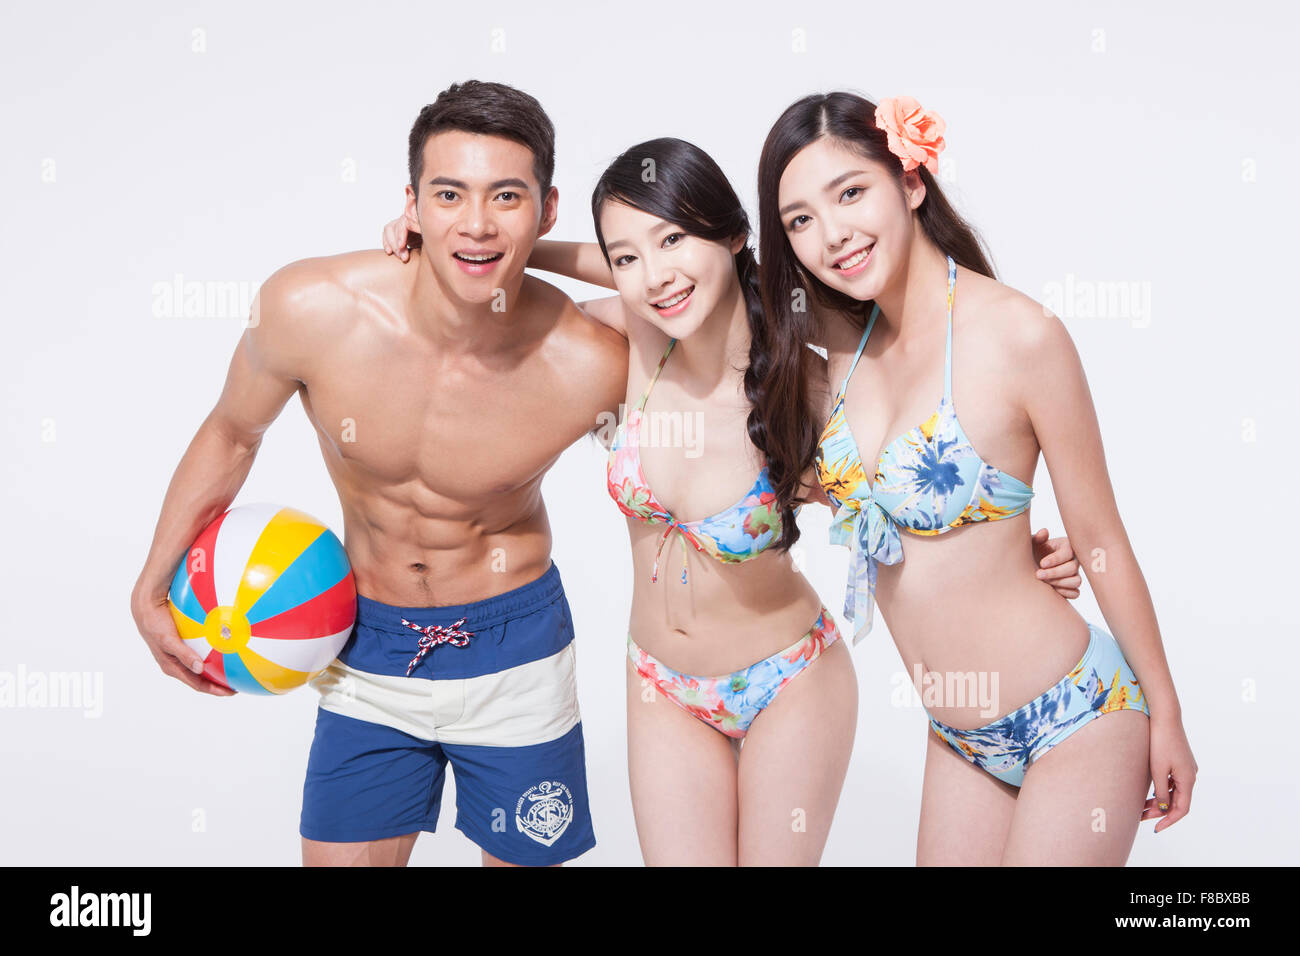 Two women in bikini and a man in swimming pants holding a beach ball  putting their arms around each other's shoulder and smiling Stock Photo -  Alamy